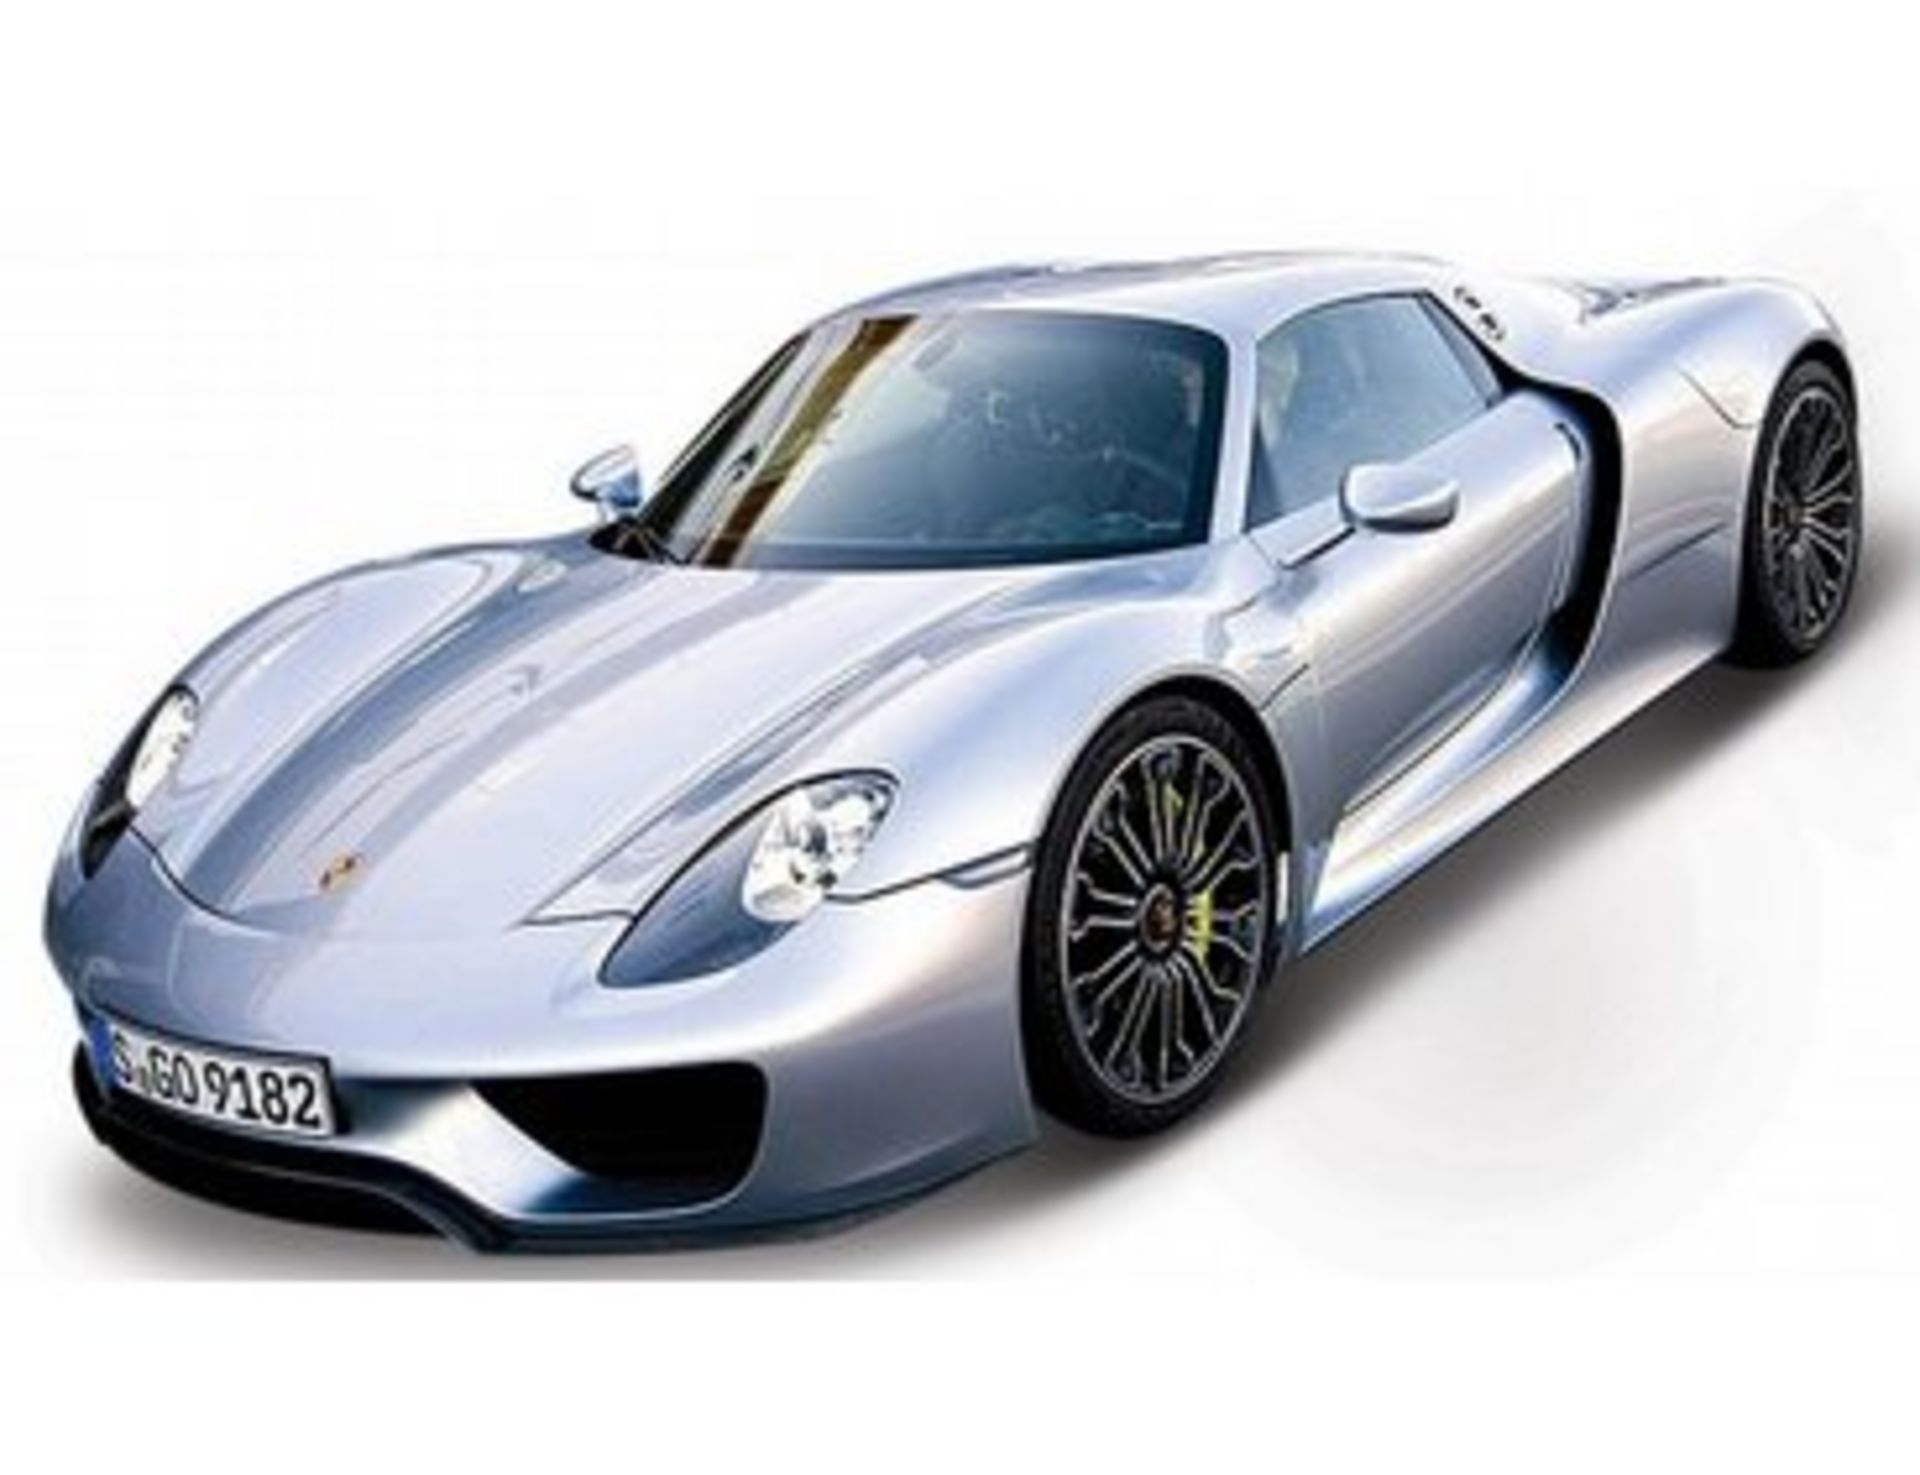 V Brand New 1:24 Radio Control Porsche 918 Spyder Fully Licensed With Opening Doors And LED Lights